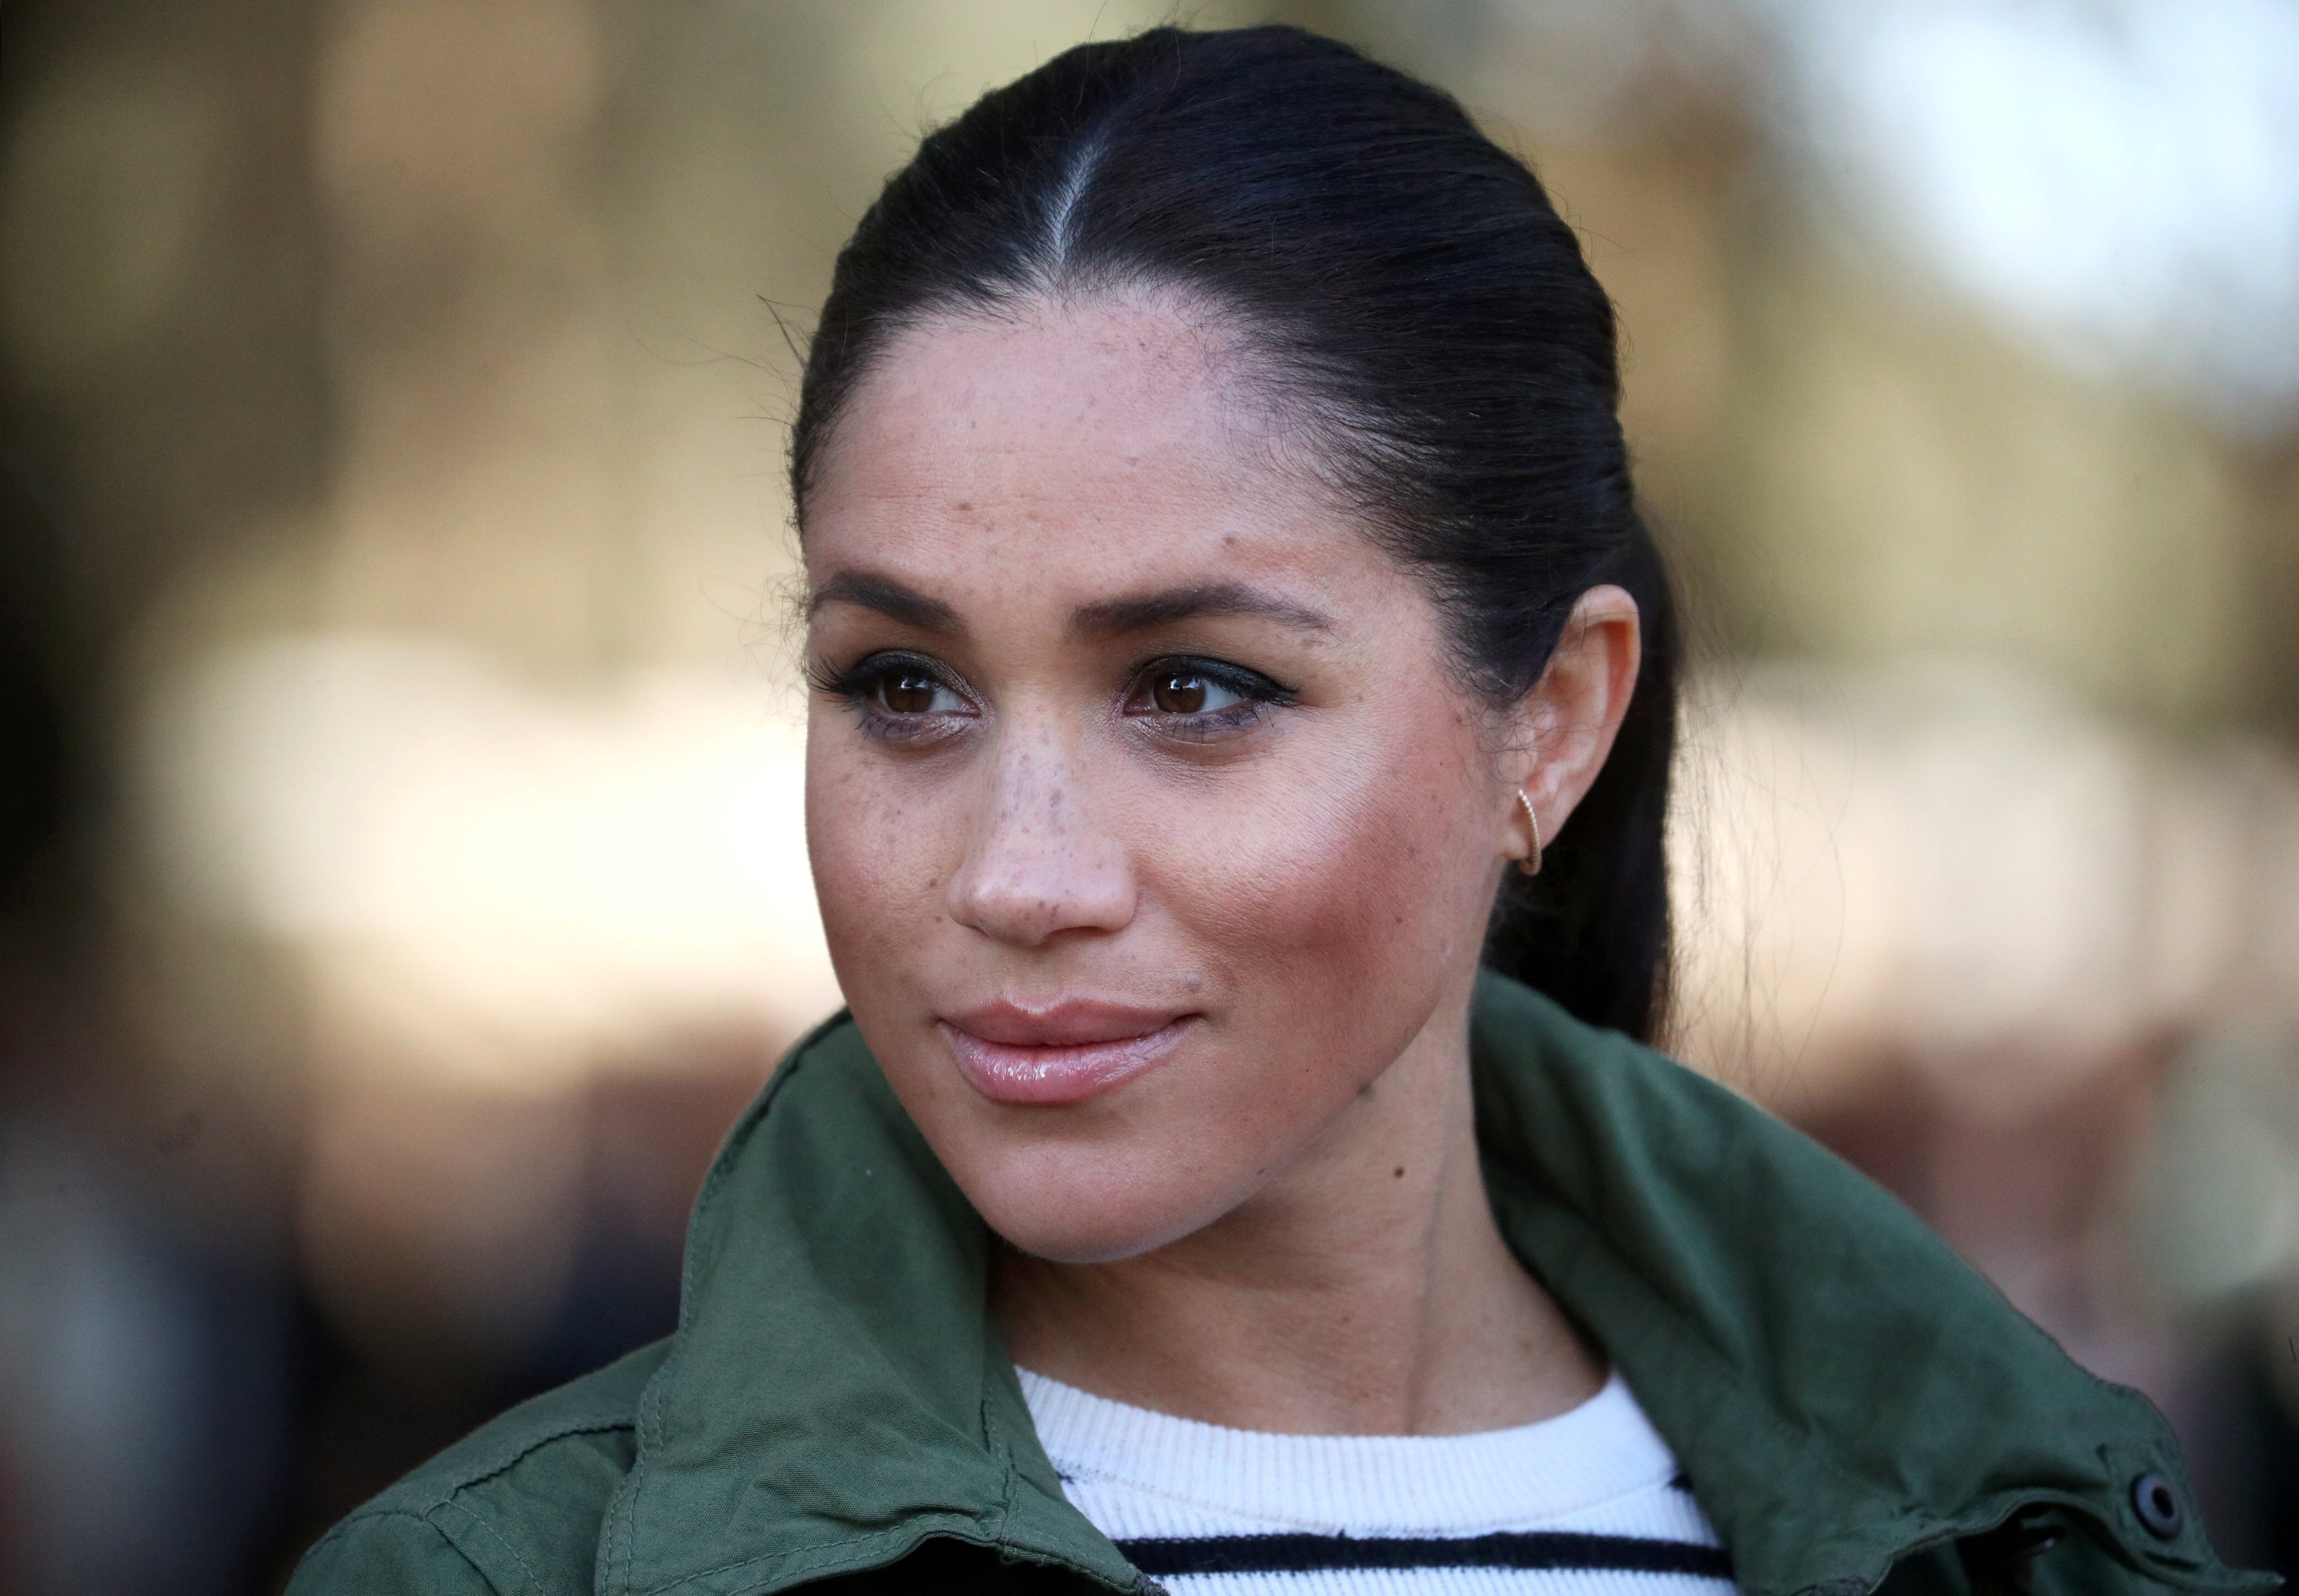 Meghan Markle during a visit to Morocco with Prince Harry in February 2019| Photo: Getty Images